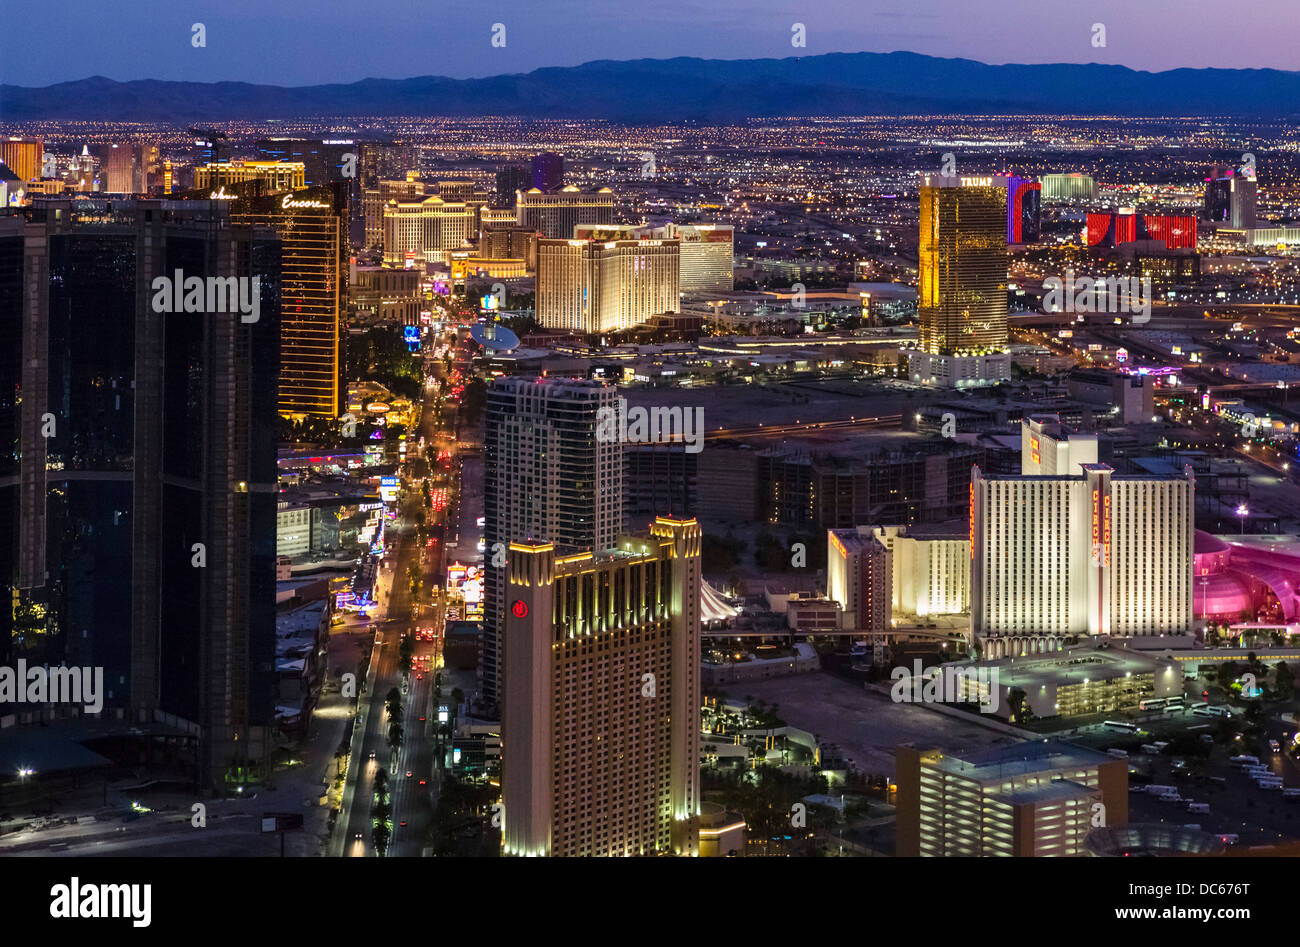 View of Las Vegas Boulevard (The Strip) at night from the top of the Stratosphere tower, Las Vegas, Nevada, USA Stock Photo